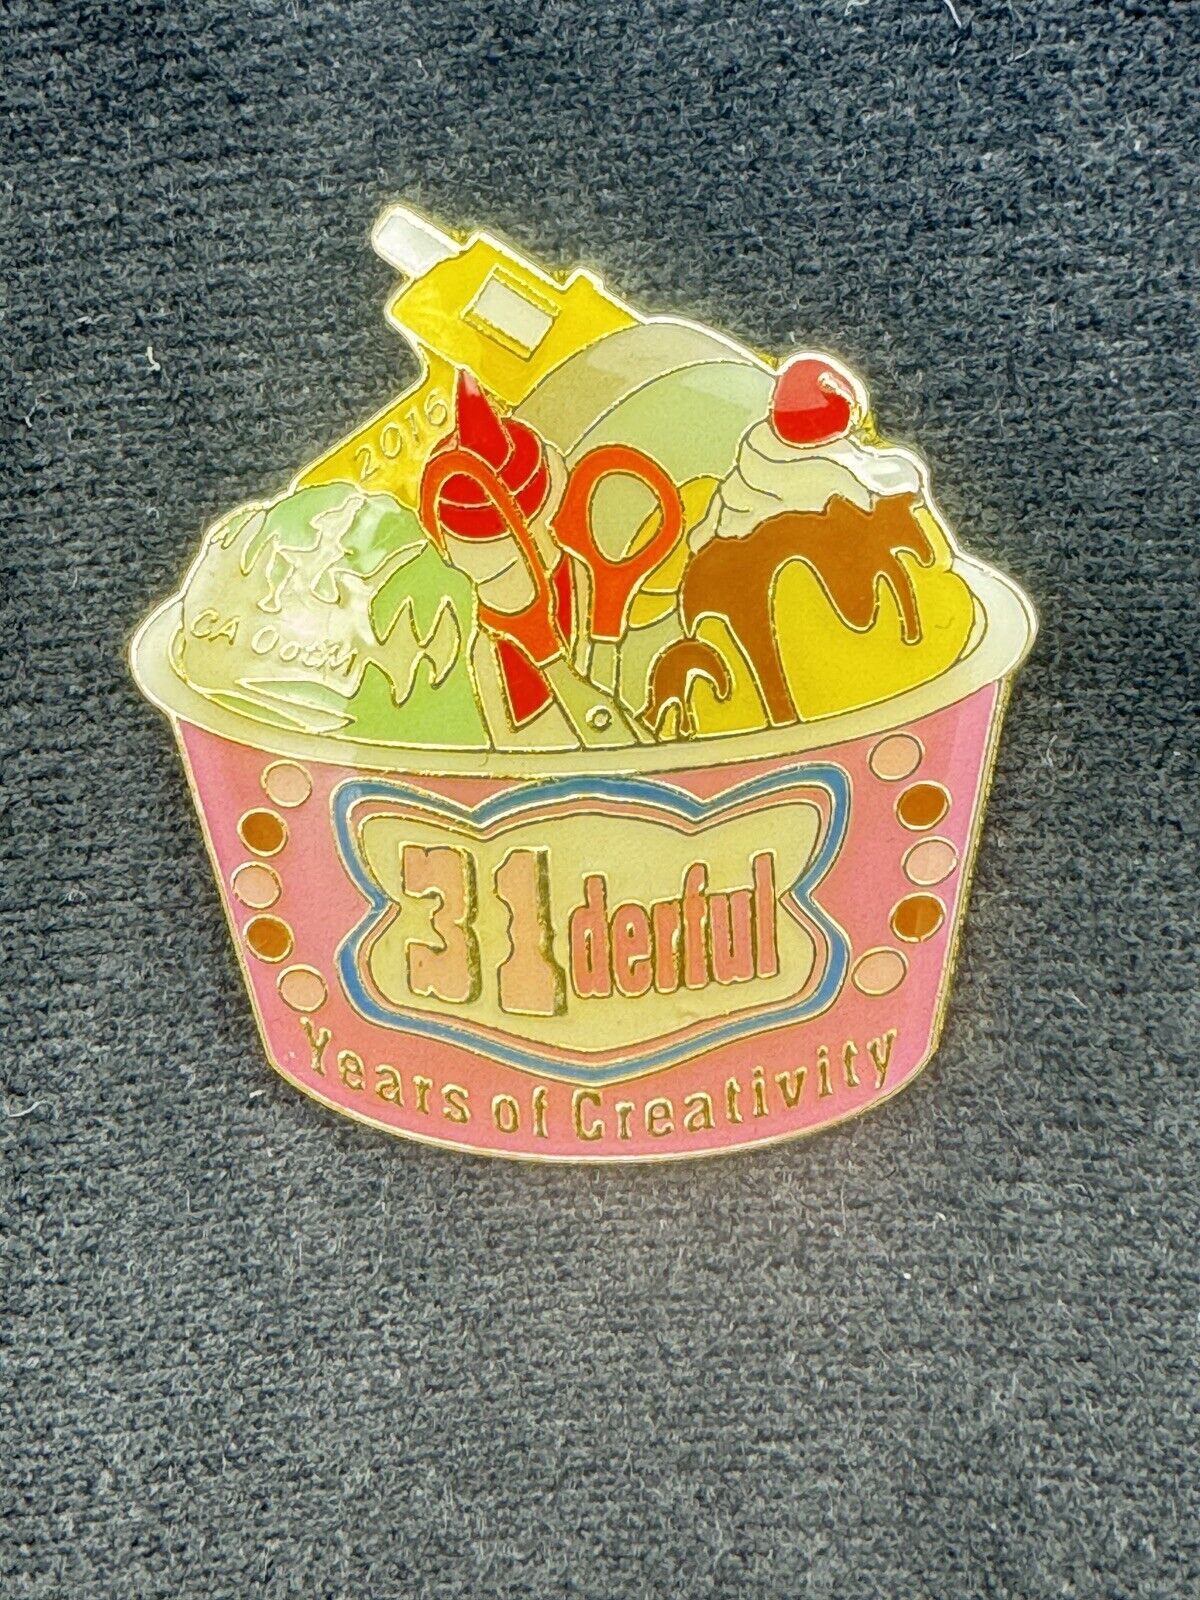 Odyssey of the Mind Collectible Pin CA OotM 2016 (31 Baskin Robbins)